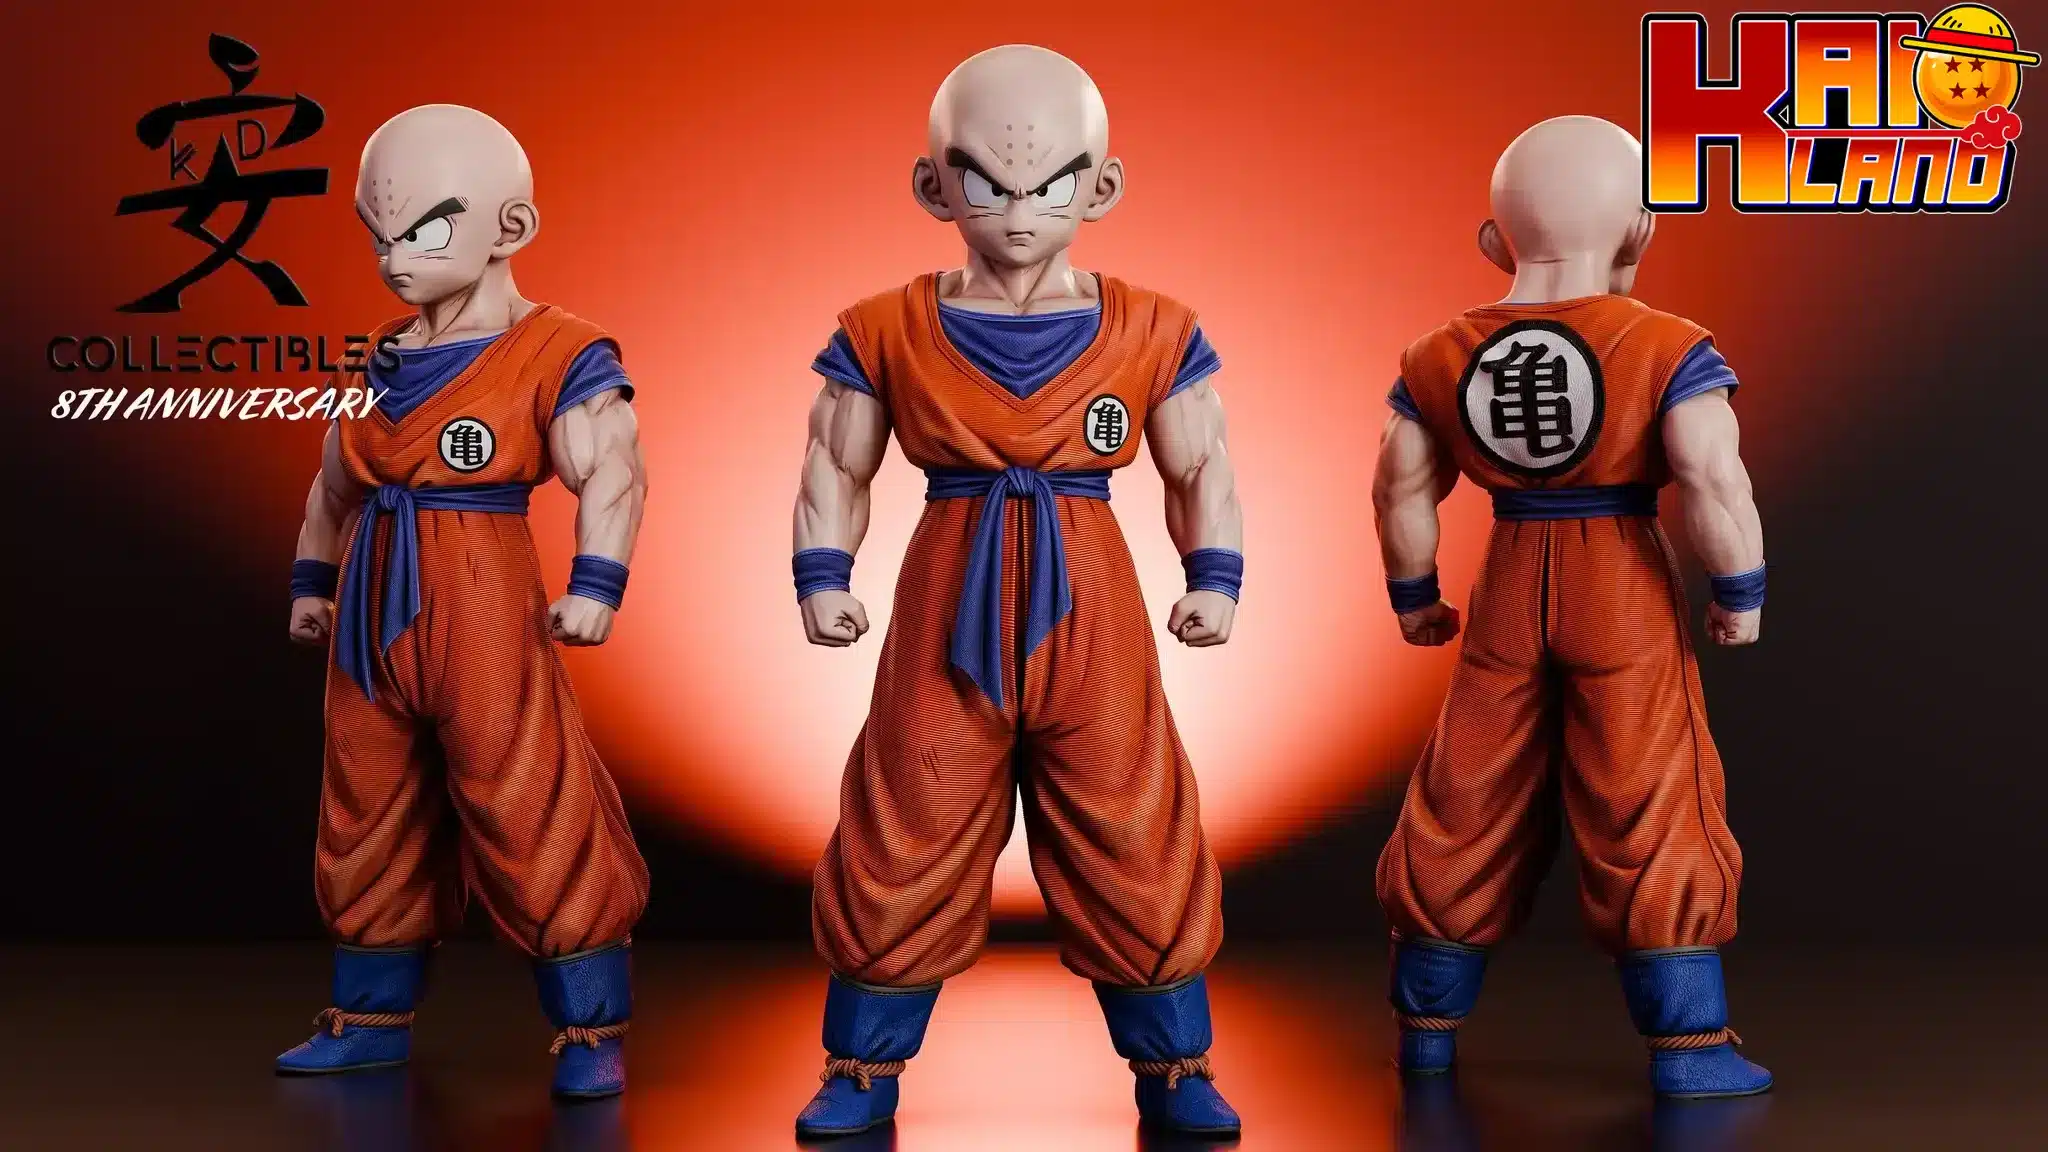 Dragon-Ball-KD-Collectibles-Z-Fighters-Resin-Statue-15-jpg.png